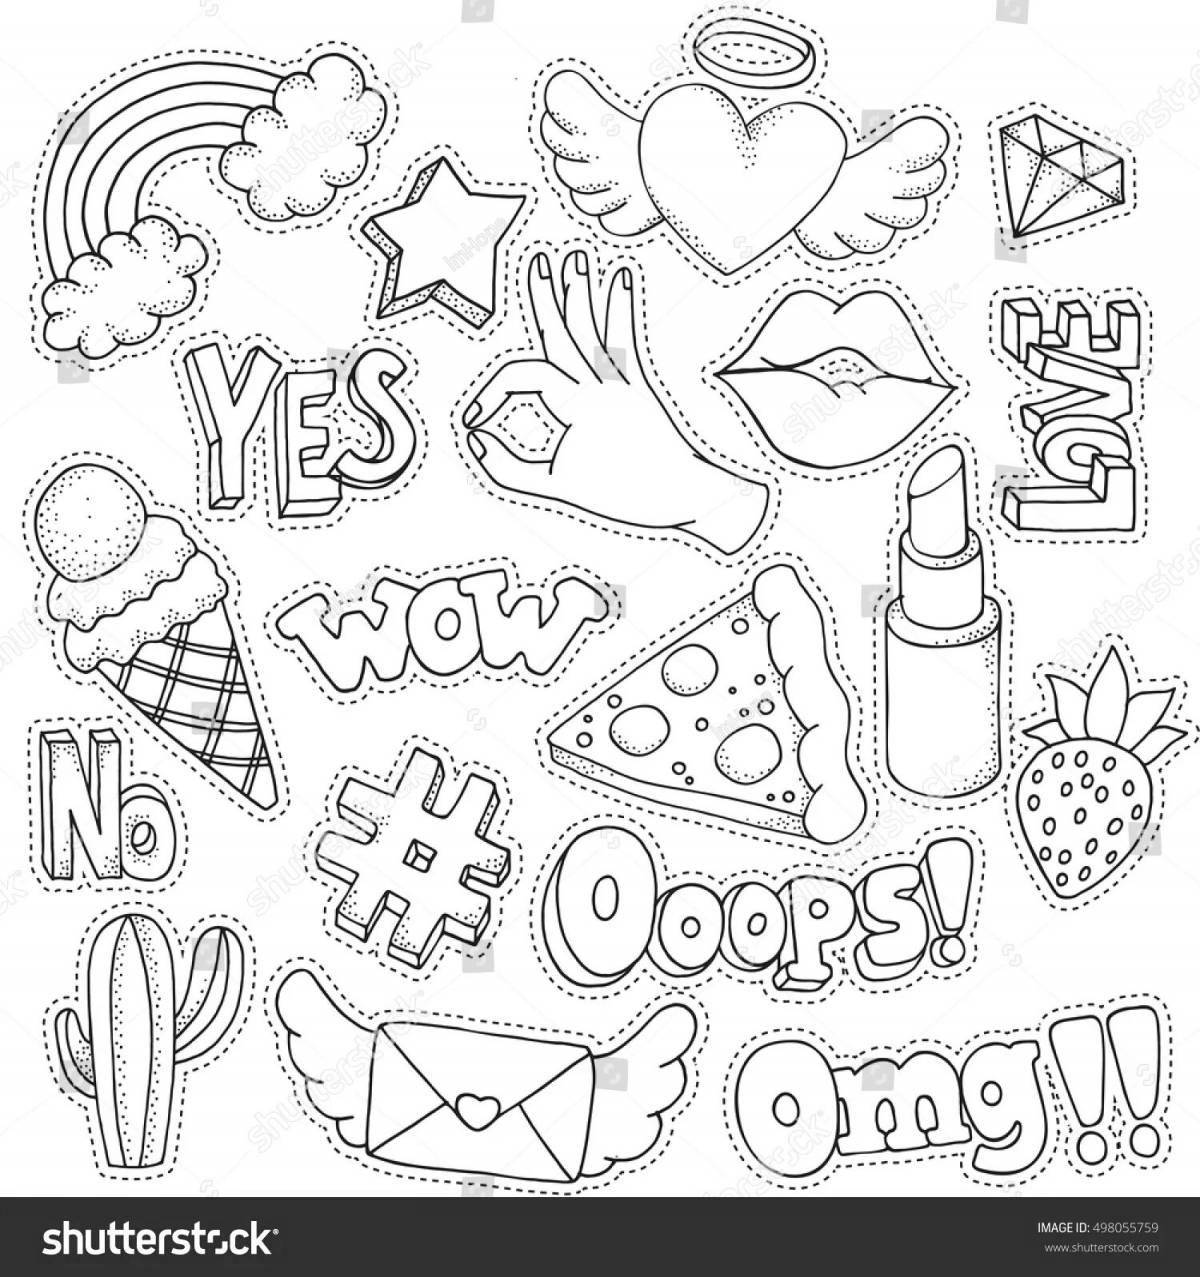 Fancy coloring sheets for stickers